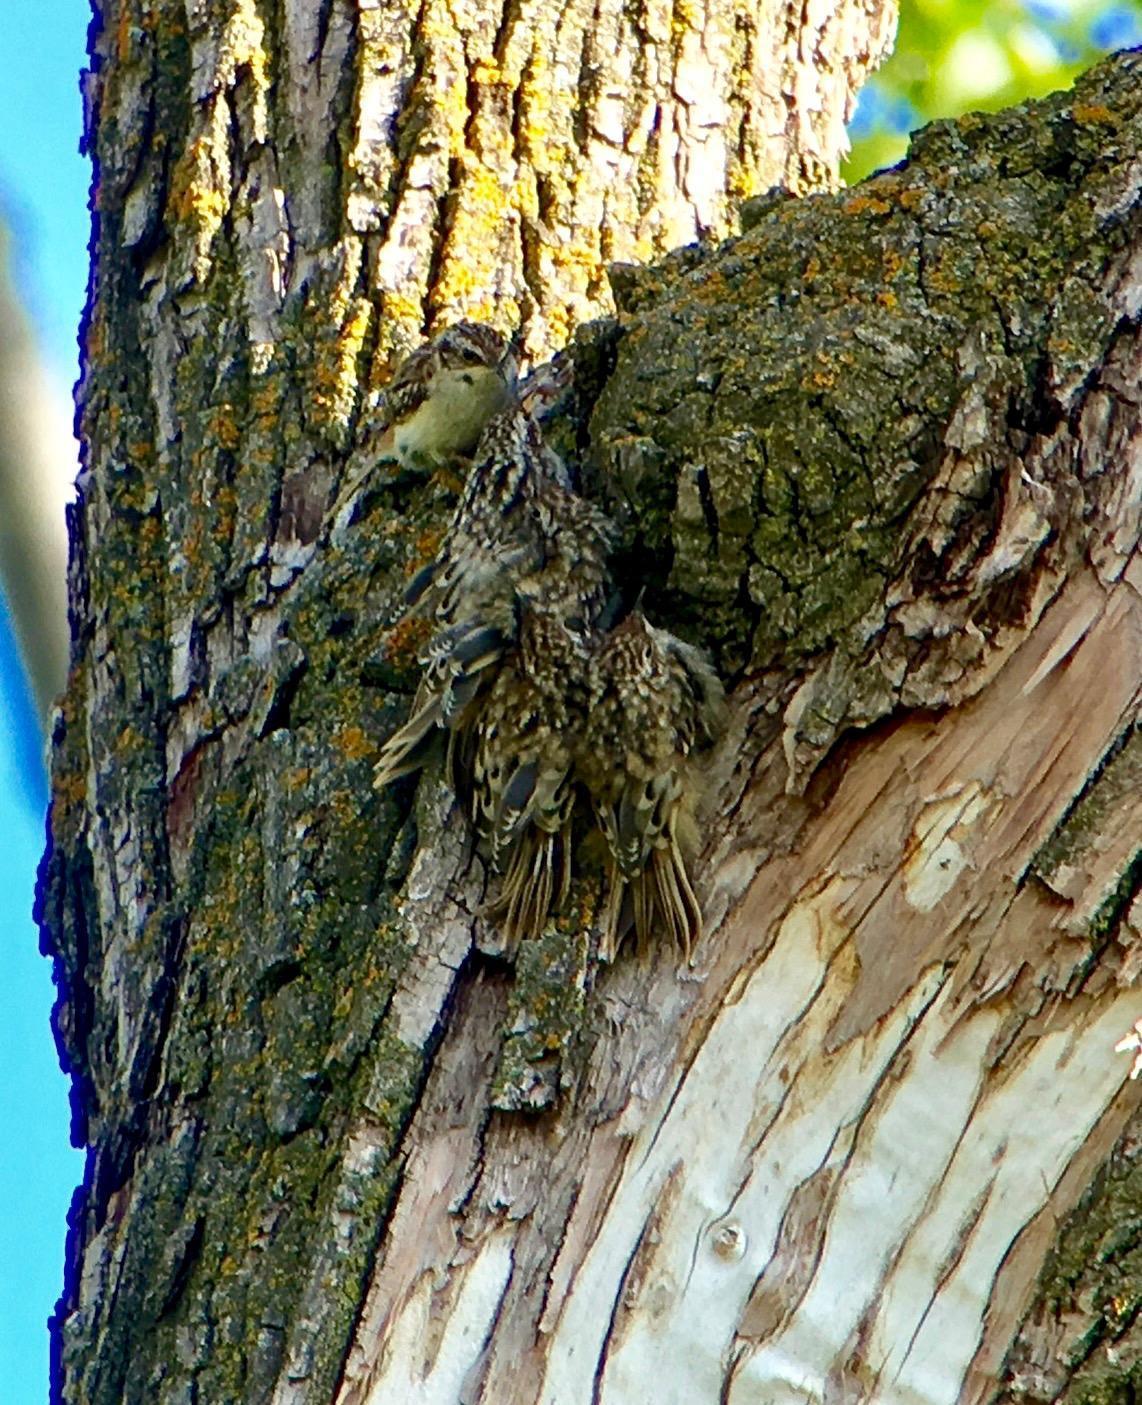 Brown Creeper Photo by Don Glasco